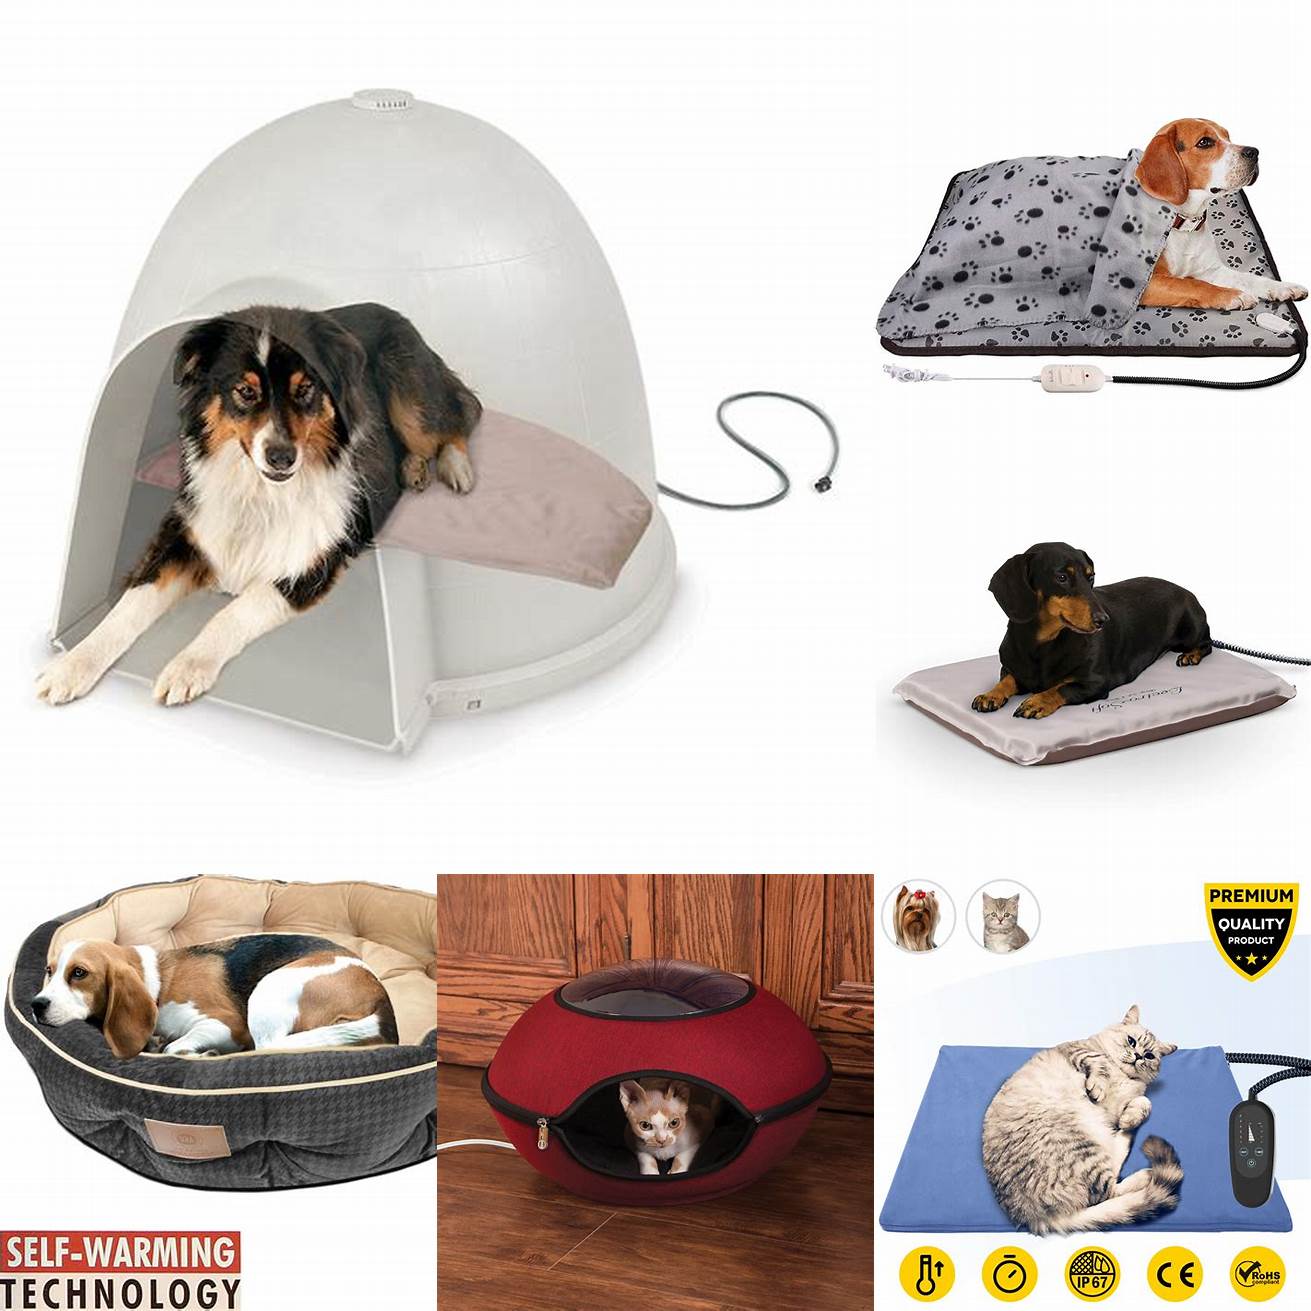 3 A pet bed with a built-in heating element